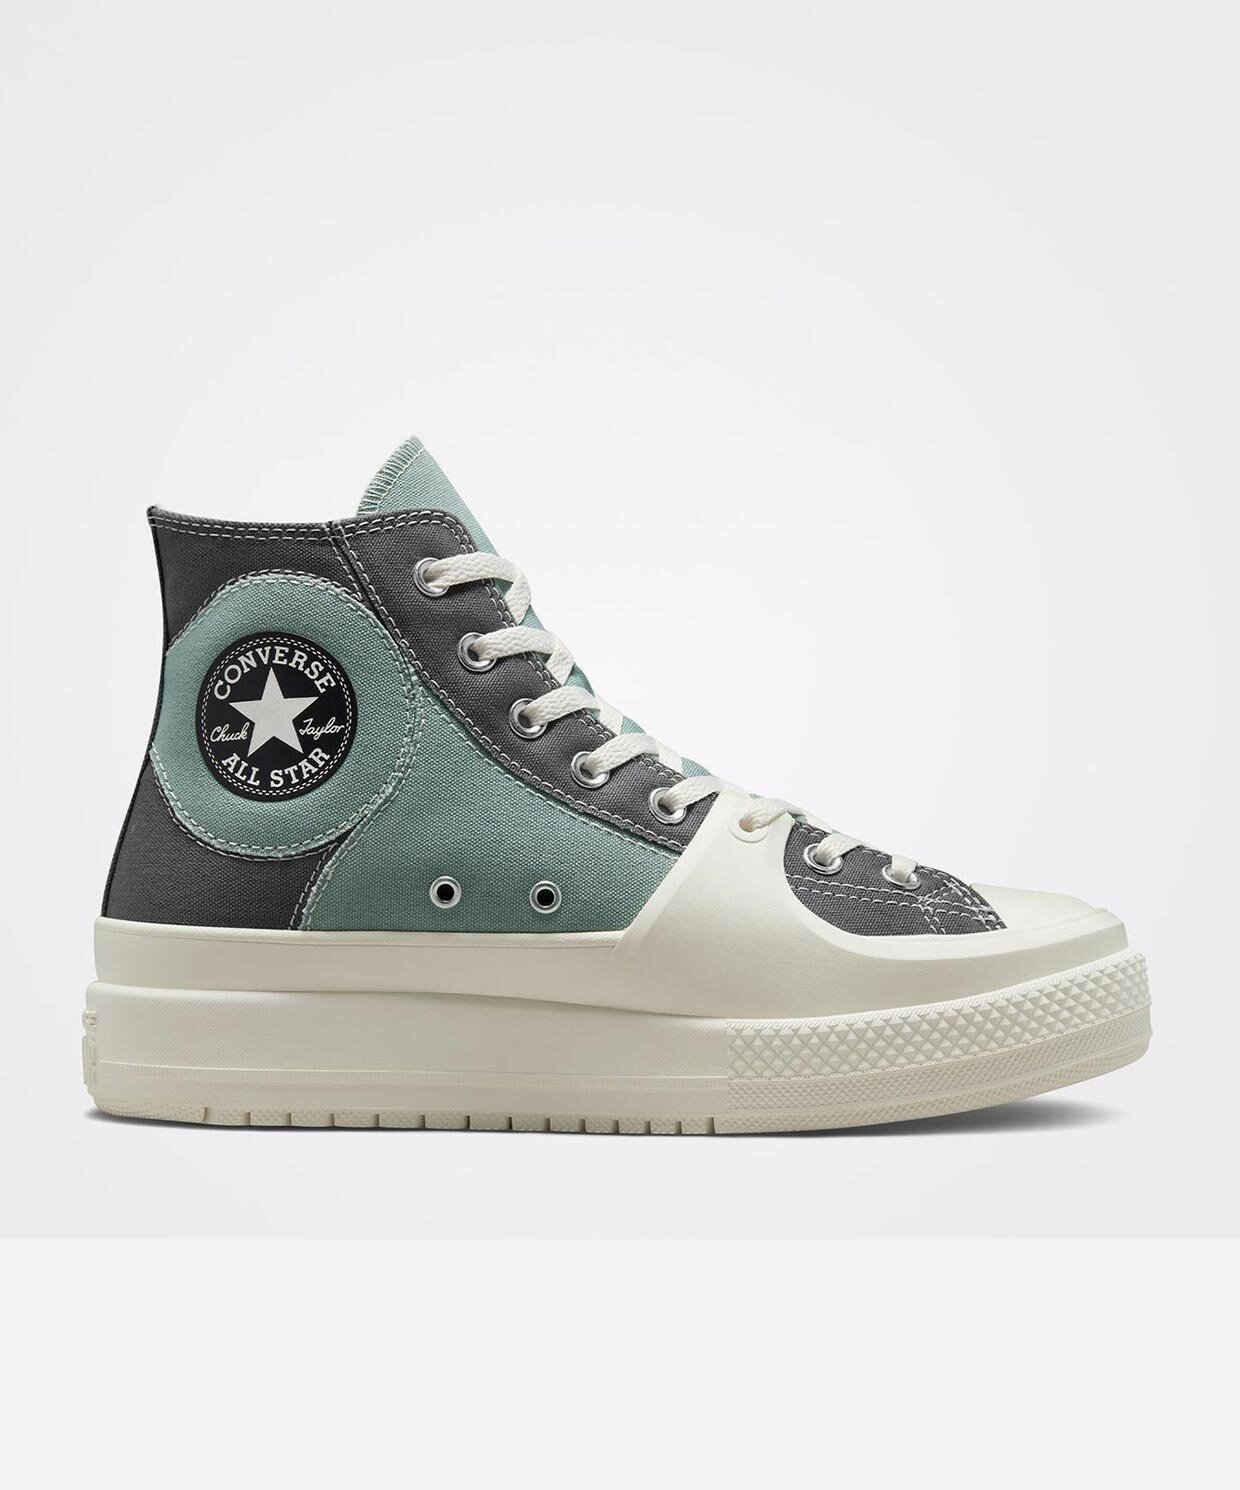 resm Converse Chuck Taylor All Star Construct Summer Utility